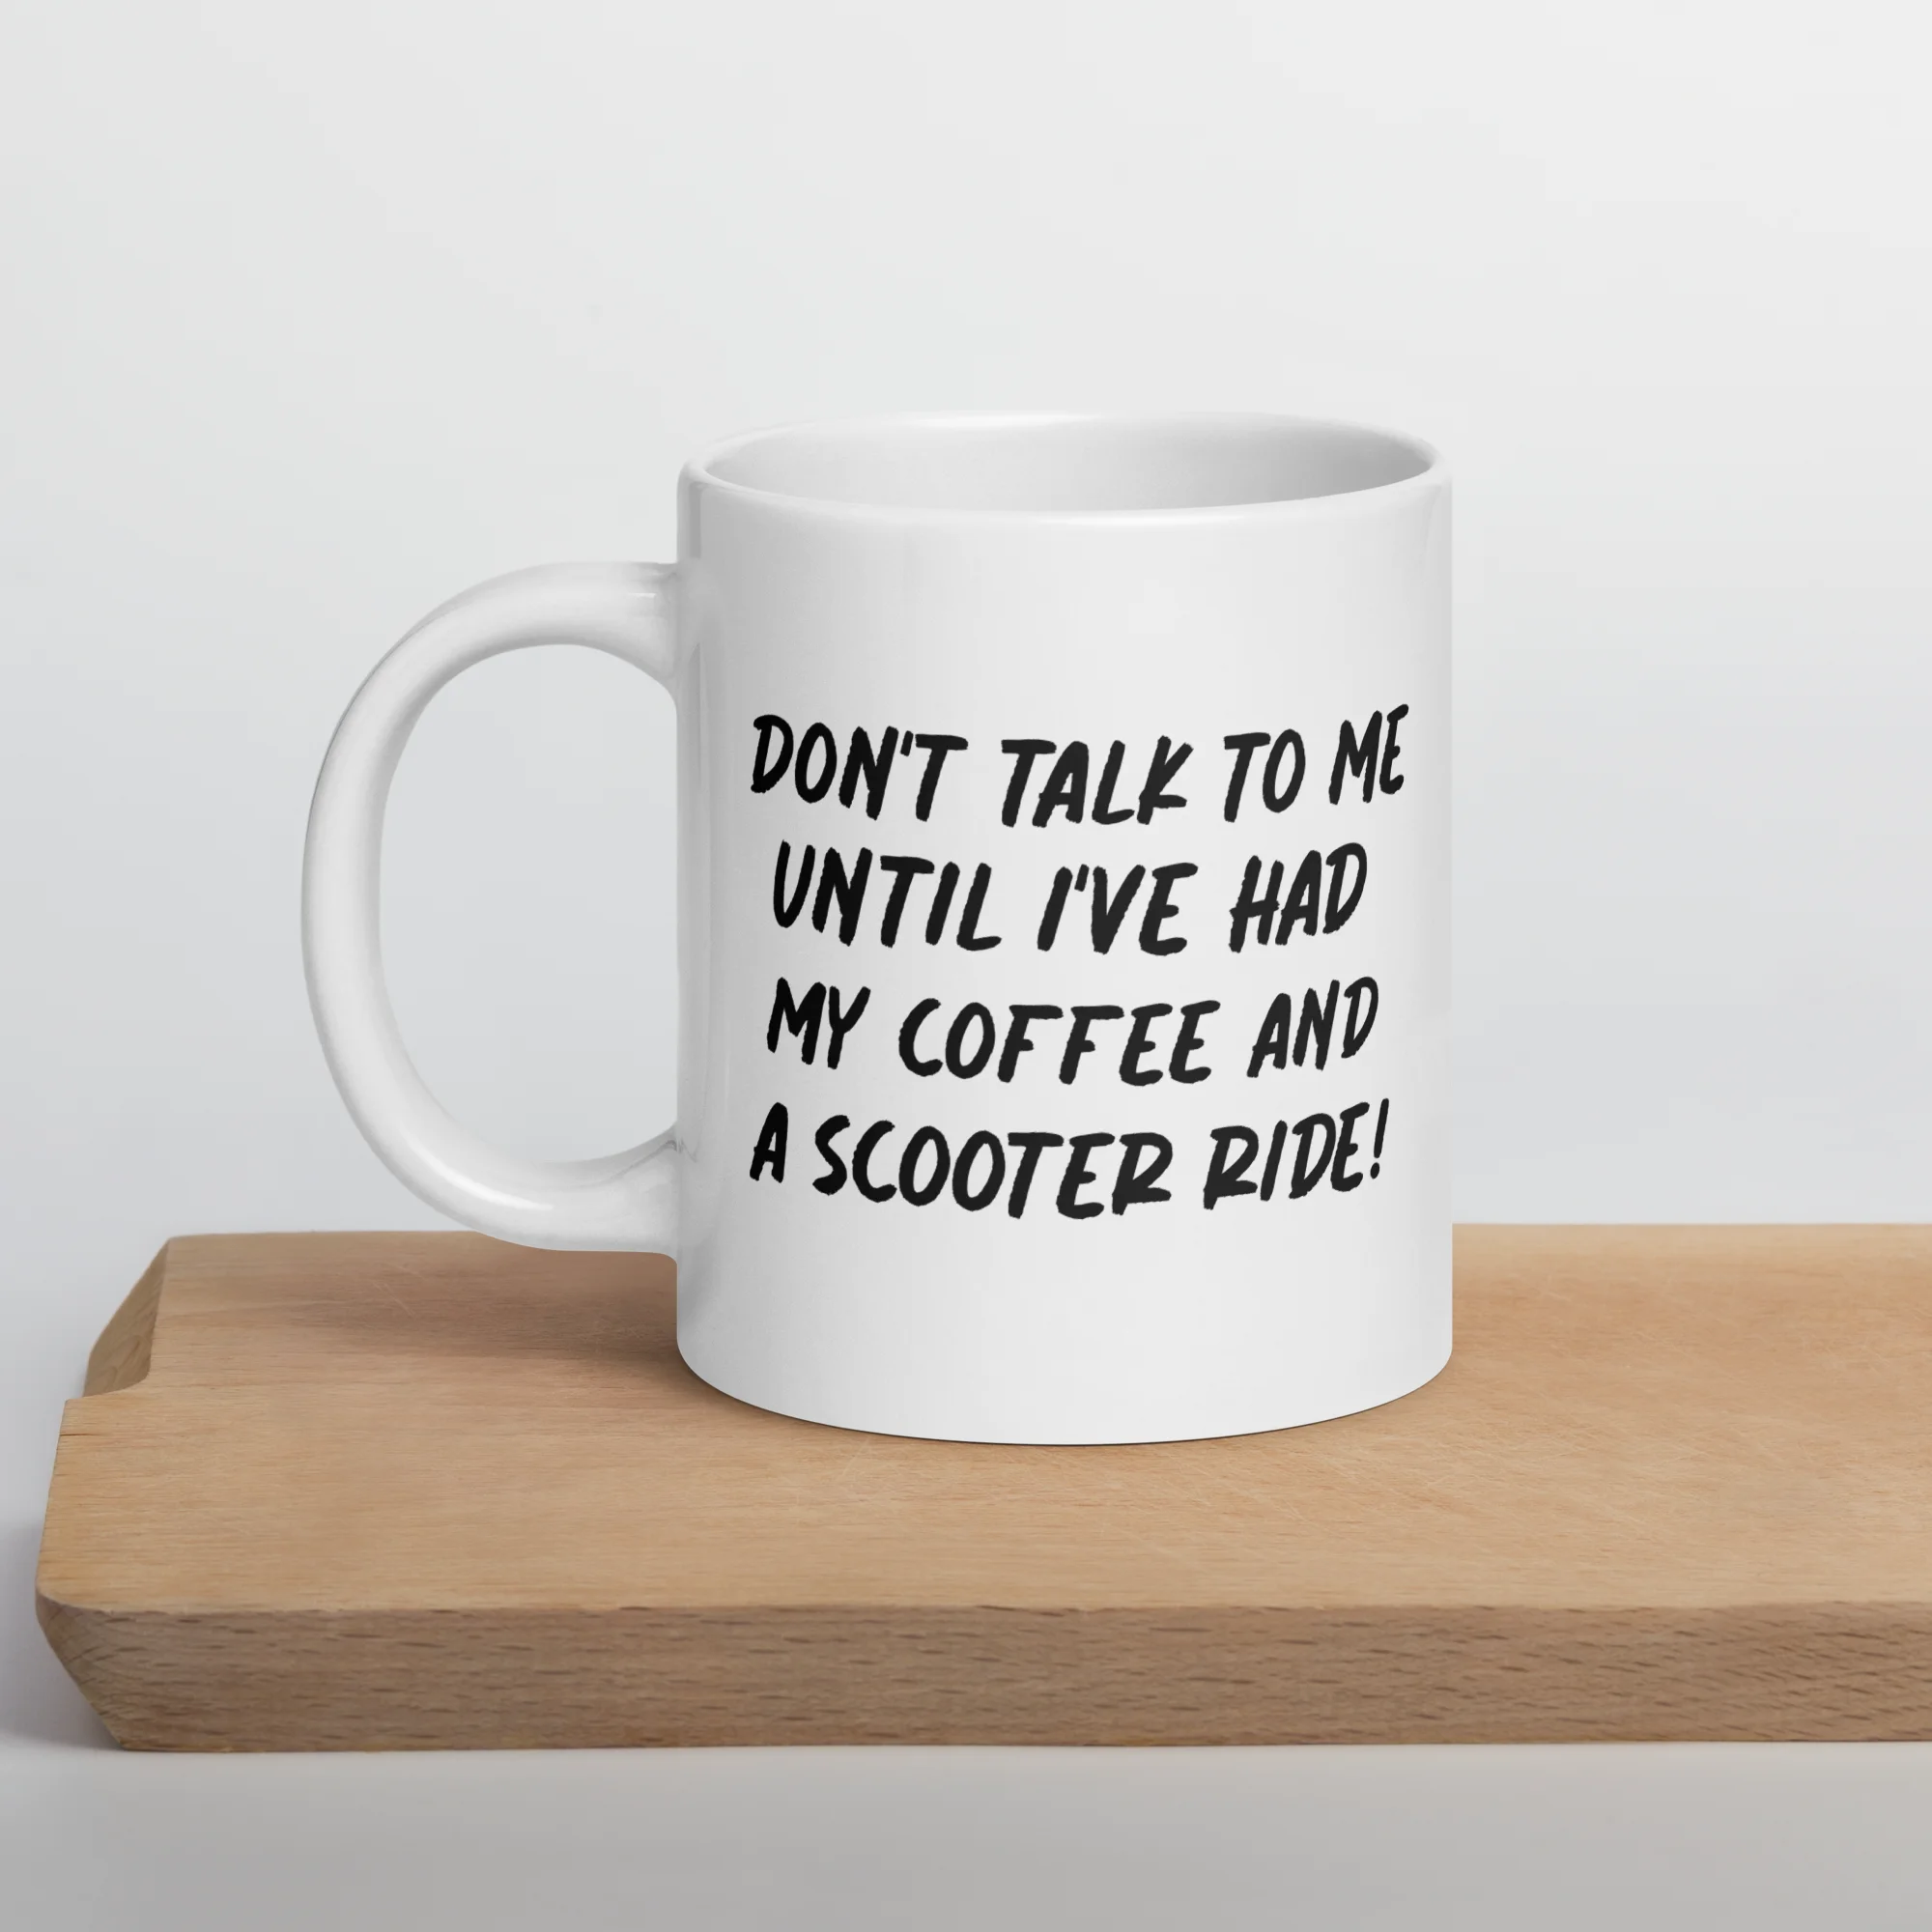 Funny Coffee Mug: Don't Talk To Me Until I've Had My Coffee And A Scooter Ride (20oz)